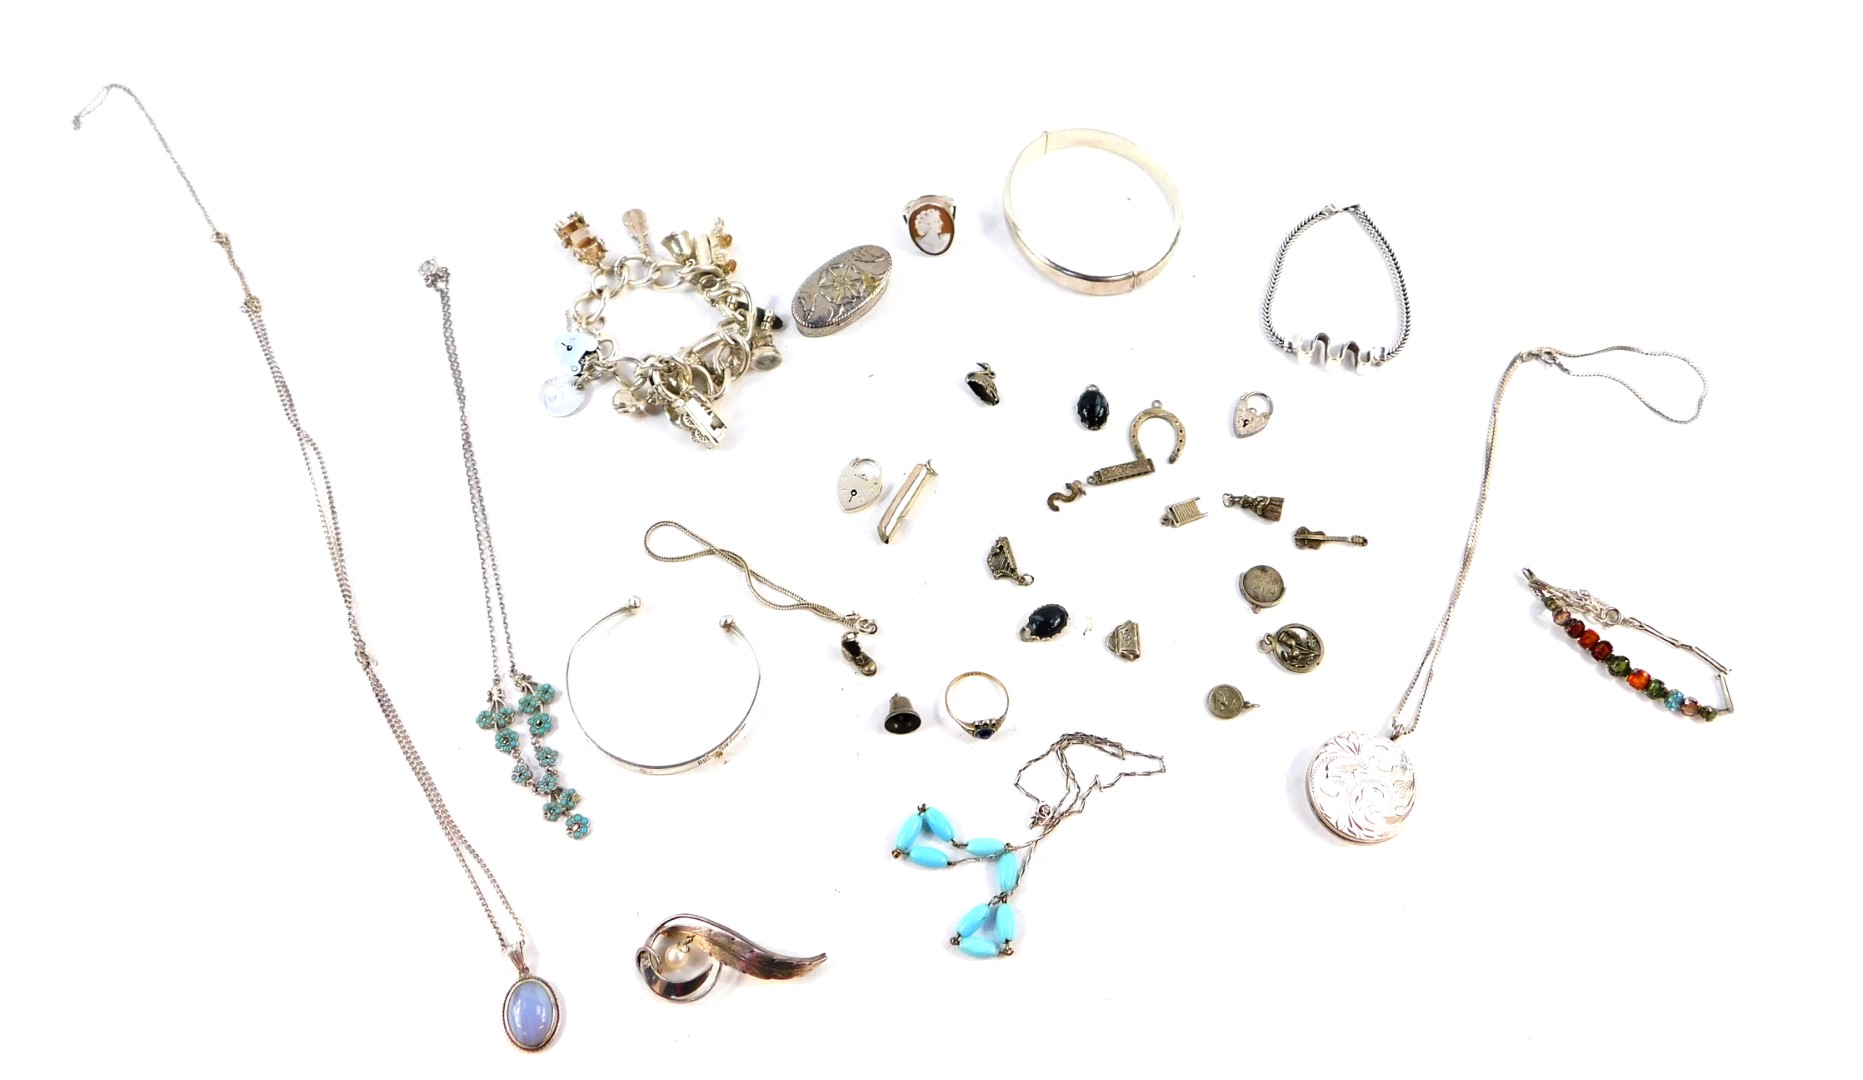 Silver and gem set jewellery, including bangles and bracelets, a charm bracelet, rings, and a